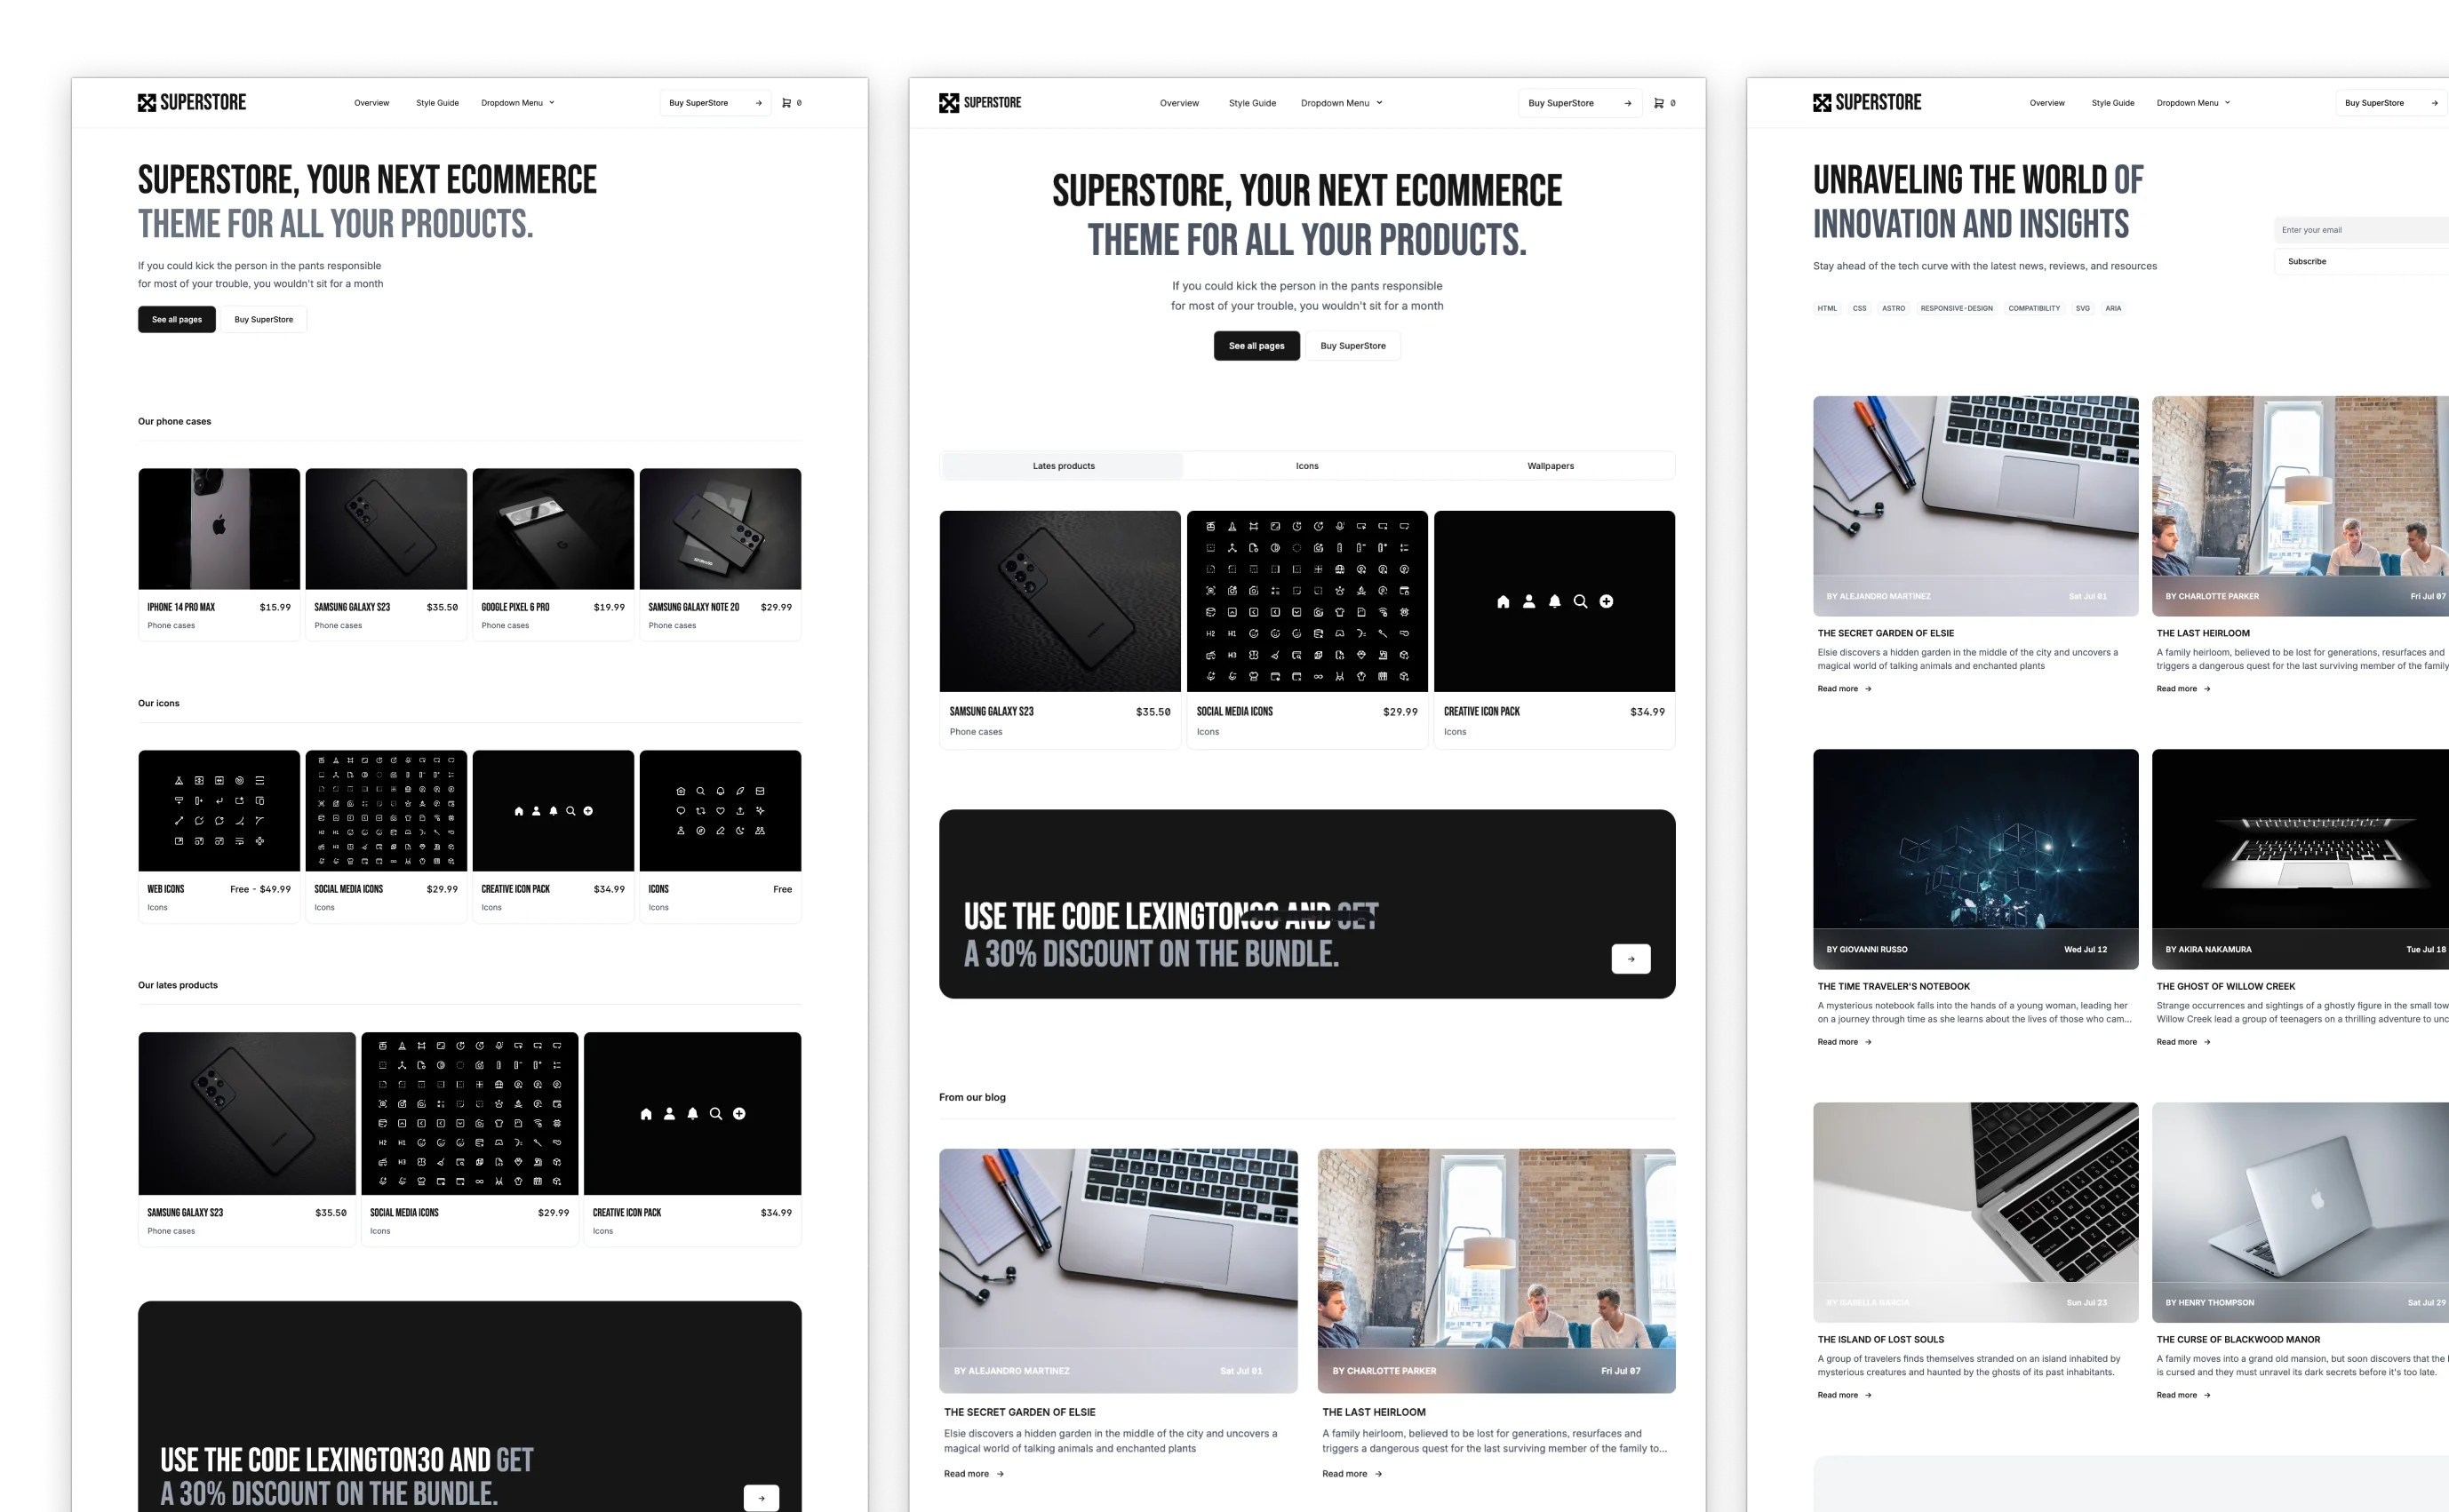 SuperStore ecommerce theme layout, featuring a product page for iPhone 14 Pro Max with images and highlights, a promotional code offer, and a grid of featured electronics products. Another section presents articles on innovation and insights with engaging imagery and article previews.